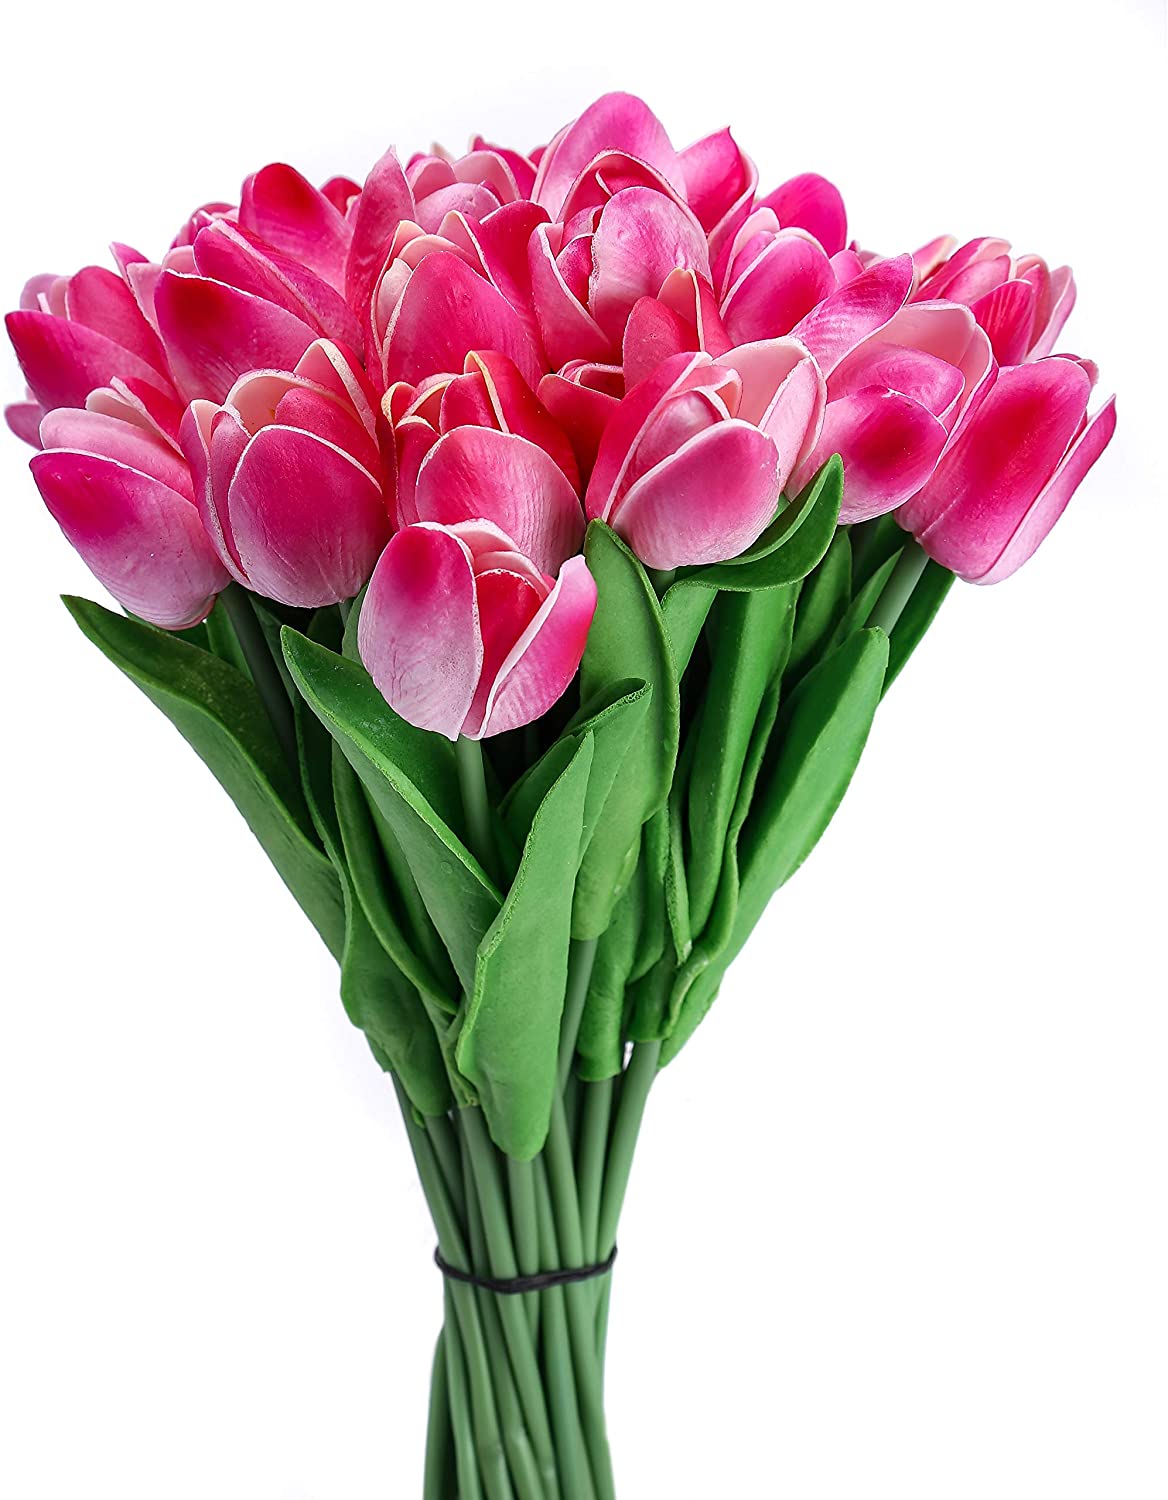 Tulip Spring Flowers - Tulips - Real Touch Tulips - Artificial Flowers - Floral Stems - Artificial Tulips